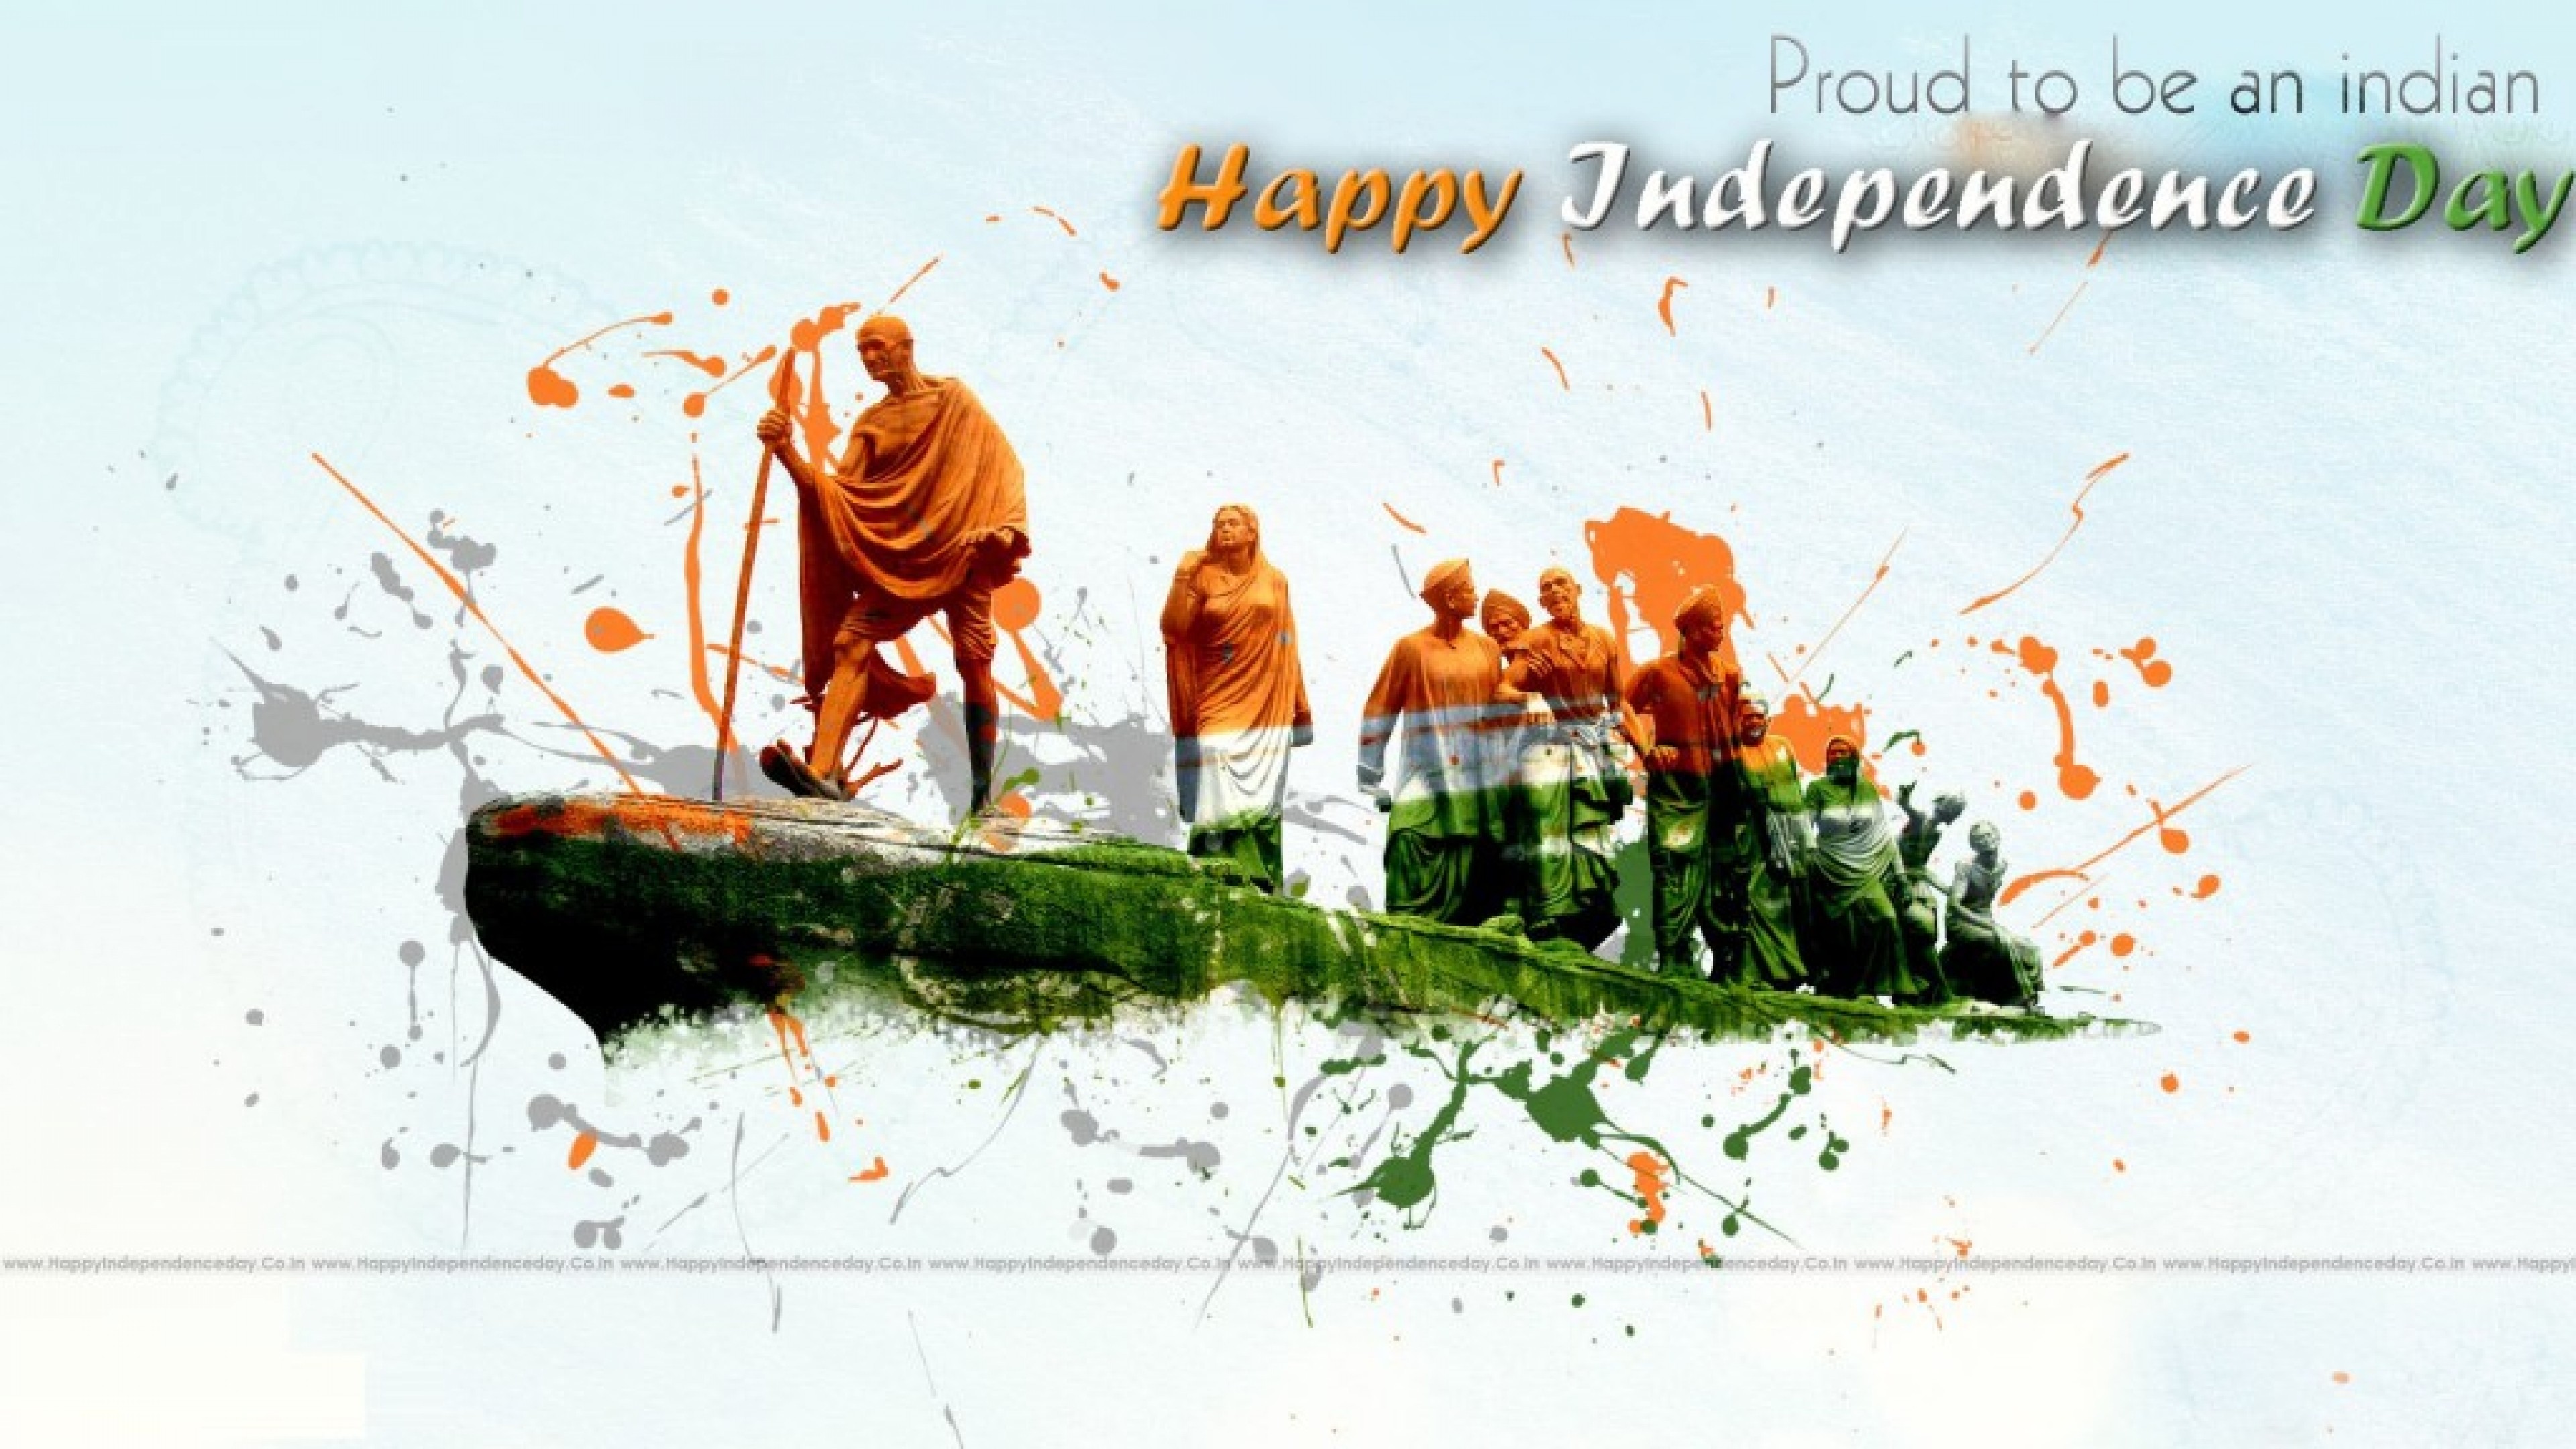 Indian Flag Wallpaper Animation for India Independence Day with